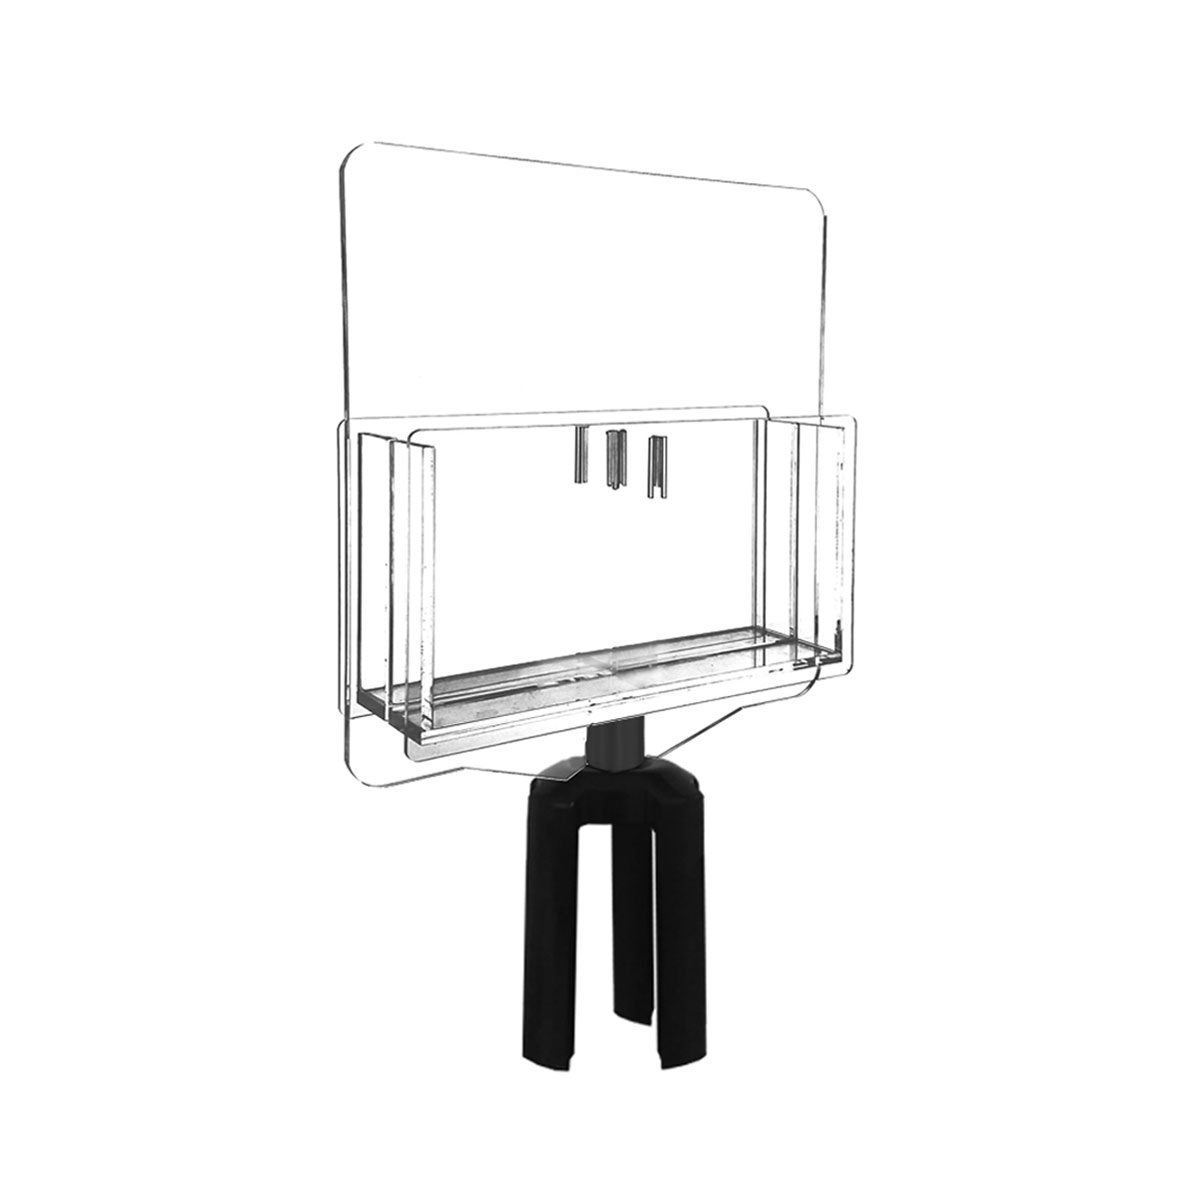 Queue Barrier Leaflet Dispenser With2 or 4 Pocket. Educate & Inform Queueing Customers. Clear Acrylic Leaflet Holder. Universal Adaptor Fits Most Major Barrier Brands. 